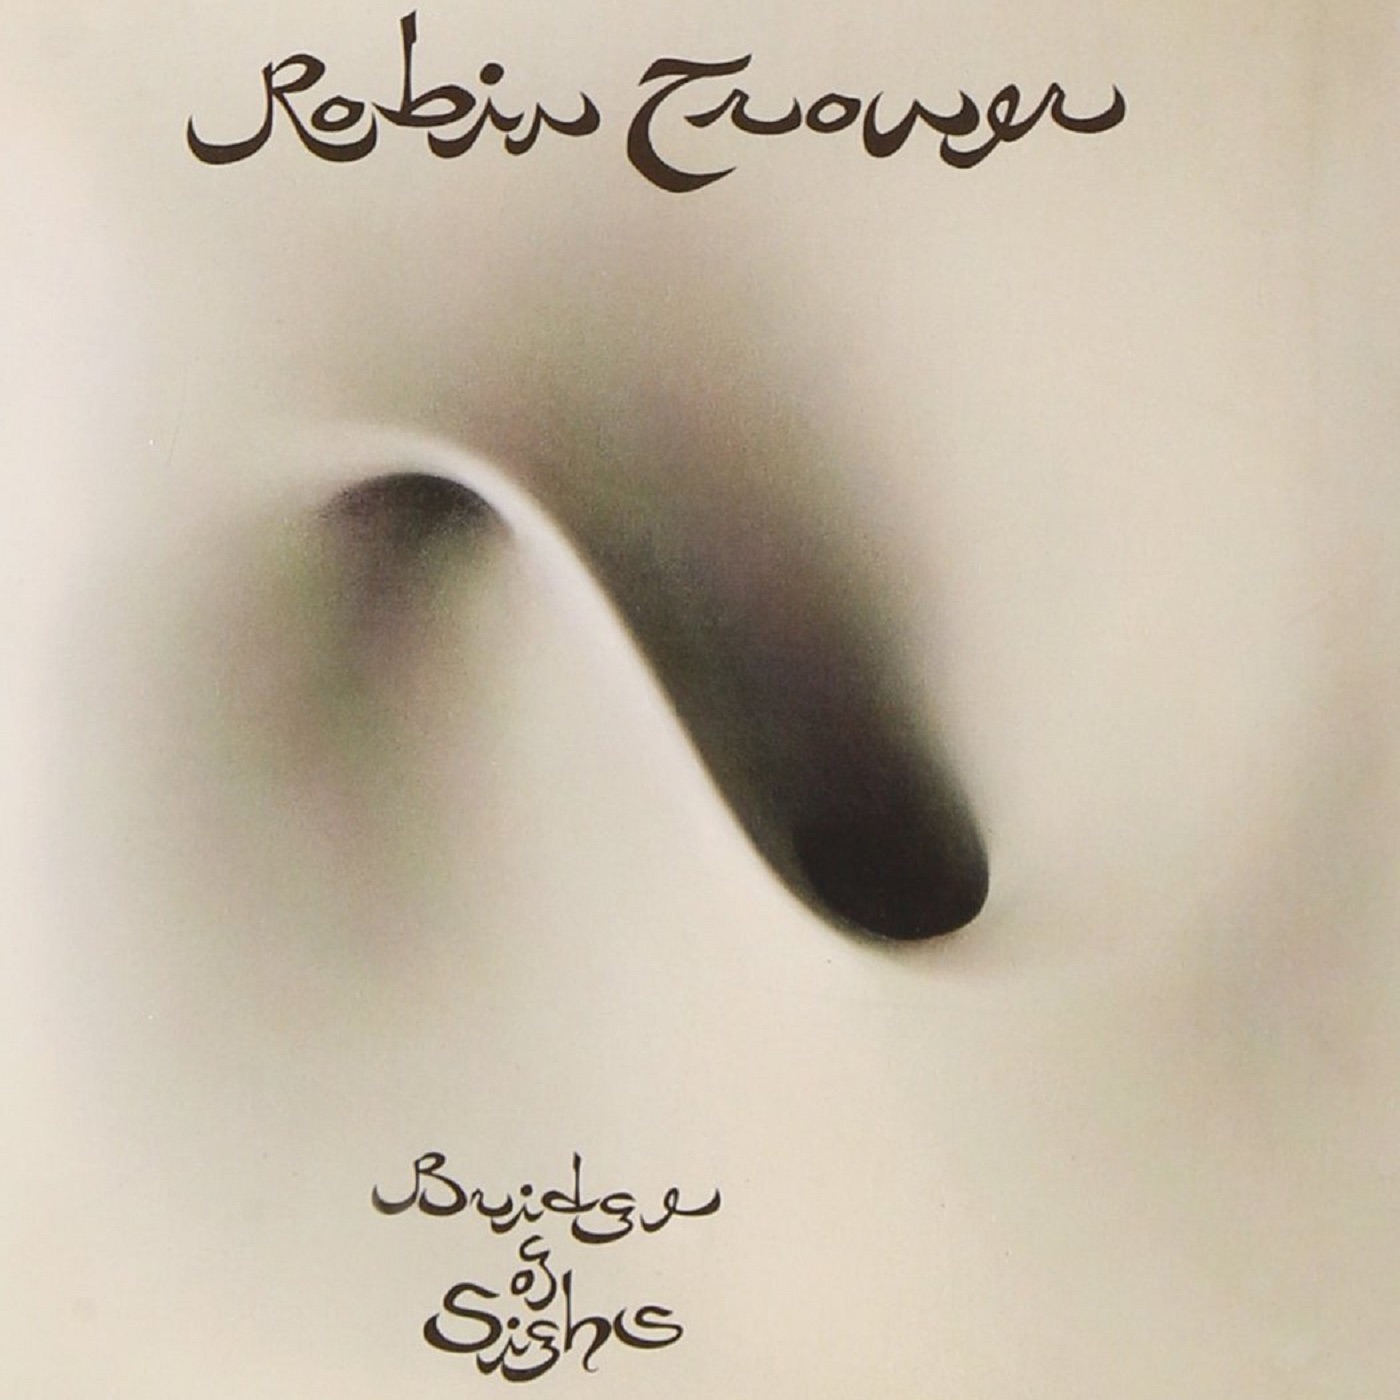 Bridge Of Sighs (2007 Remaster) by Robin Trower